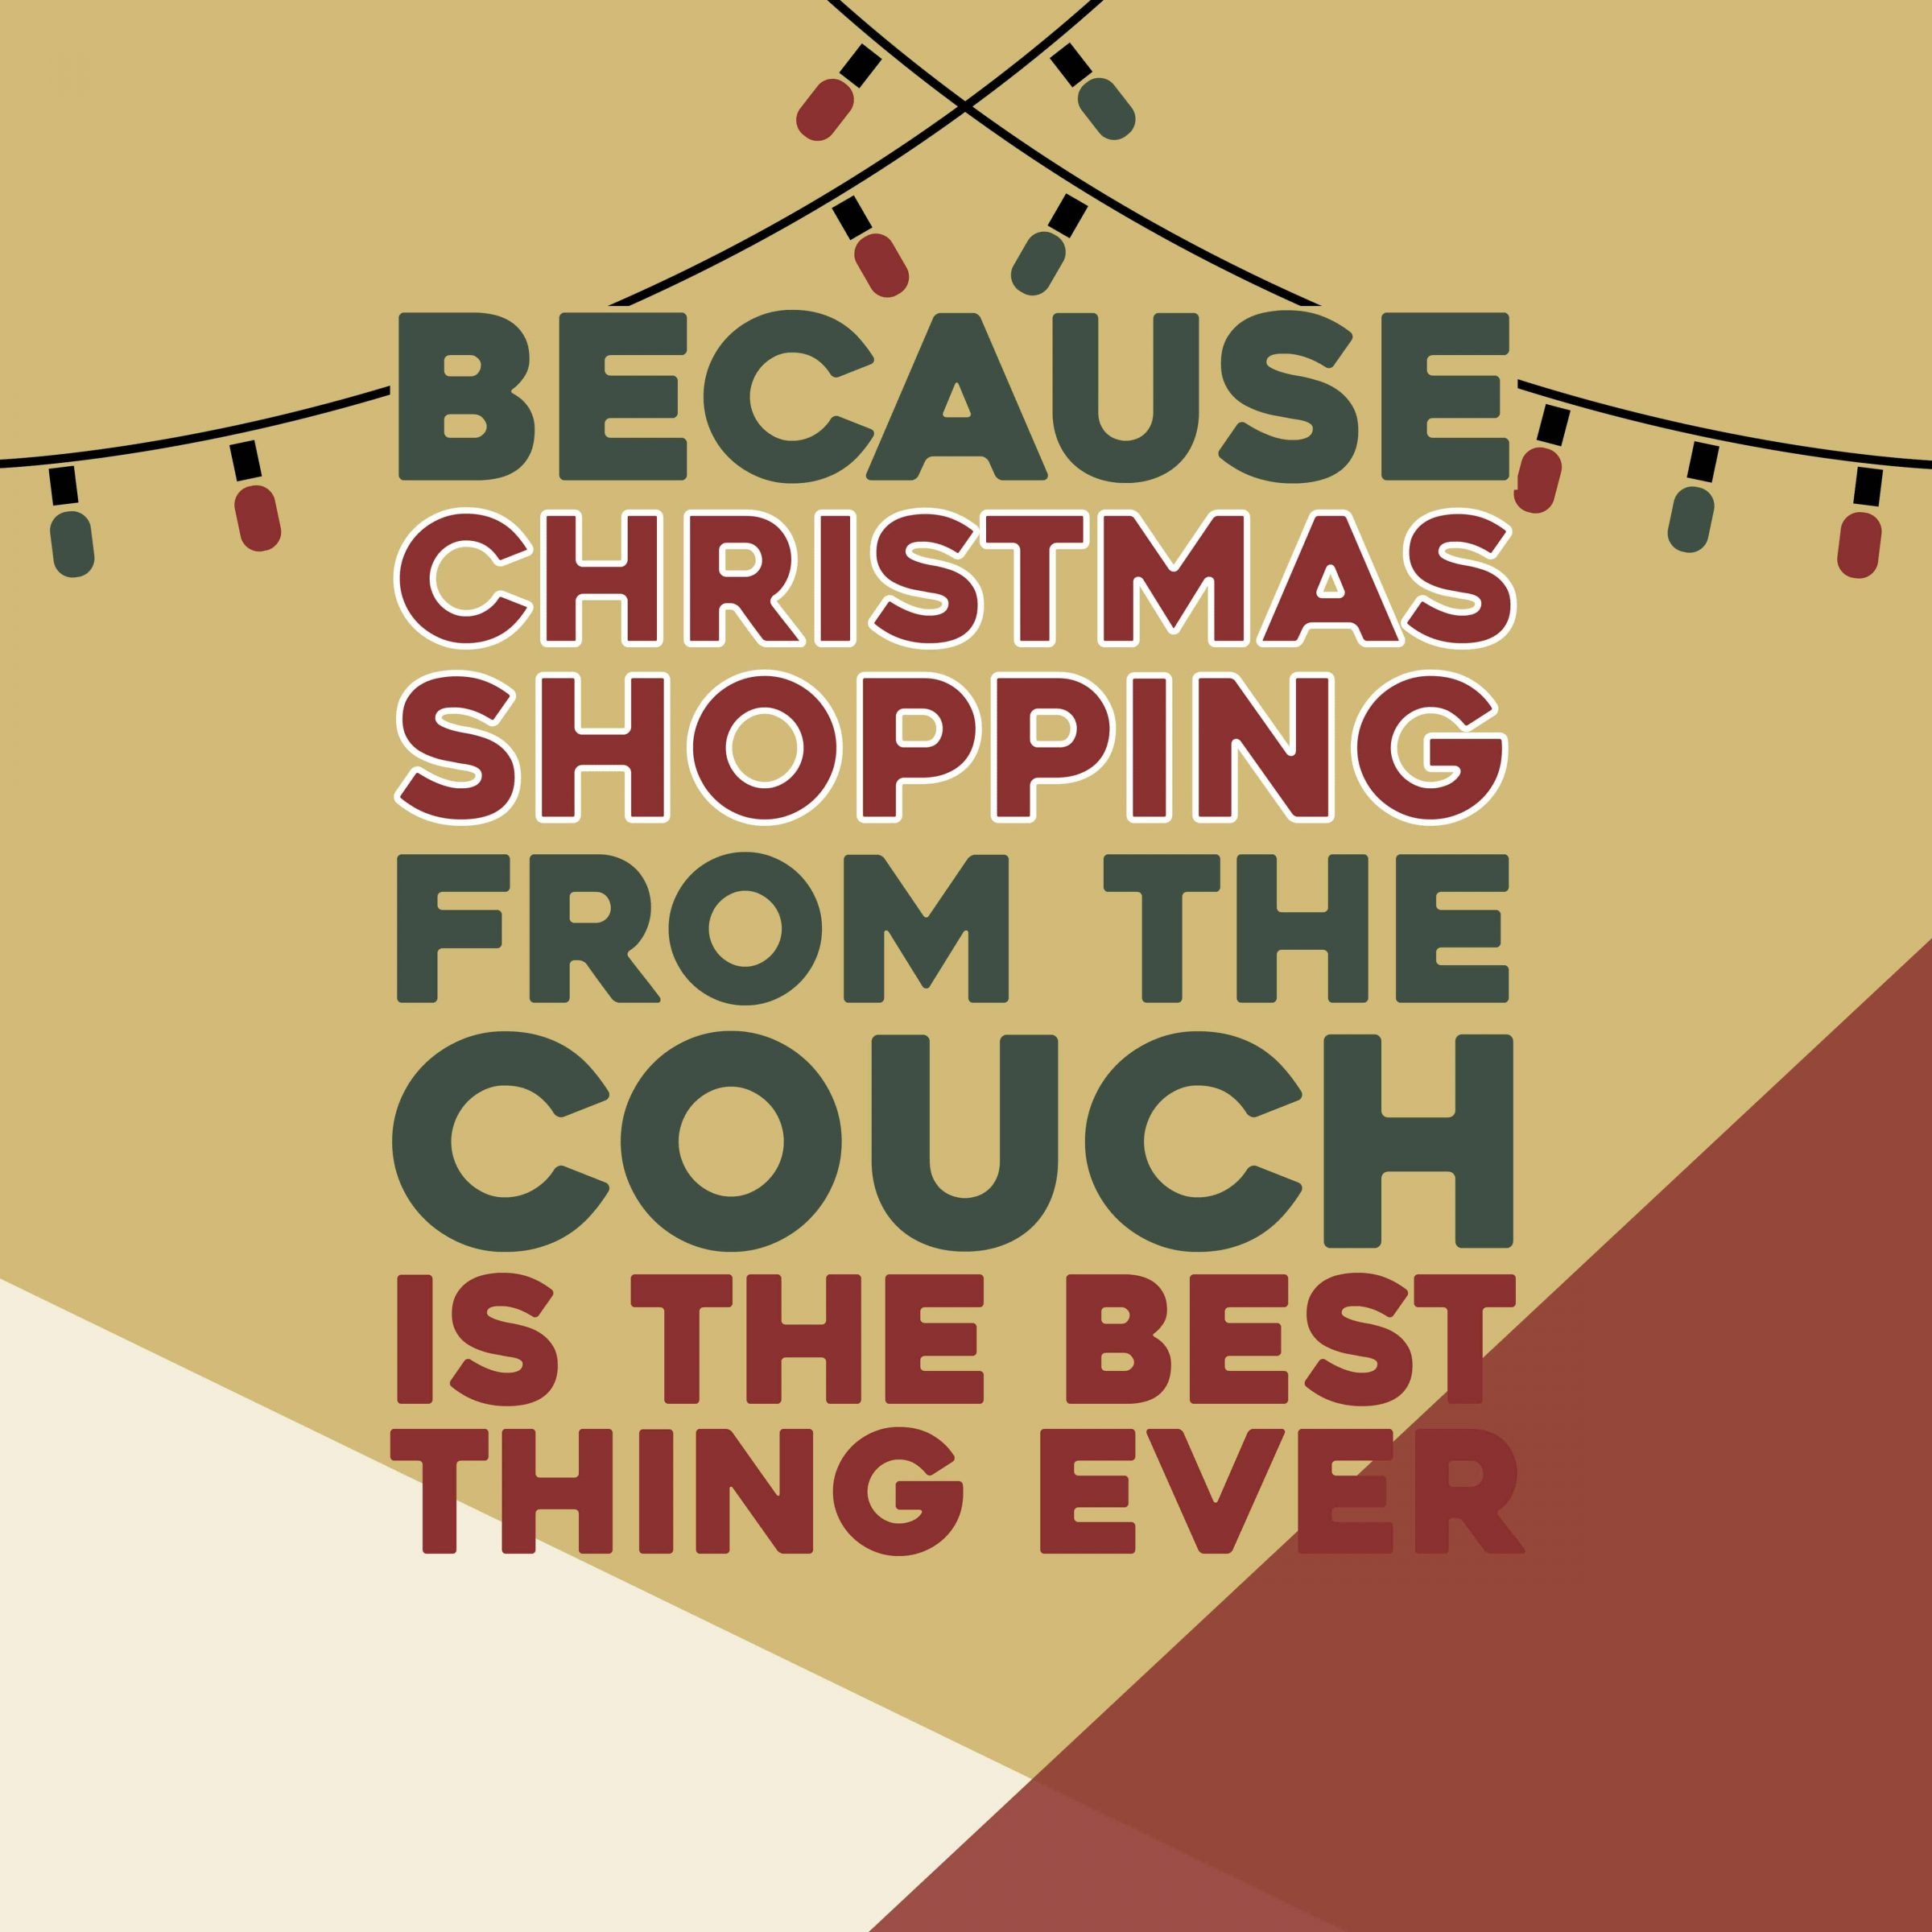 Because Christmas Shopping from the Couch is The Best Ever